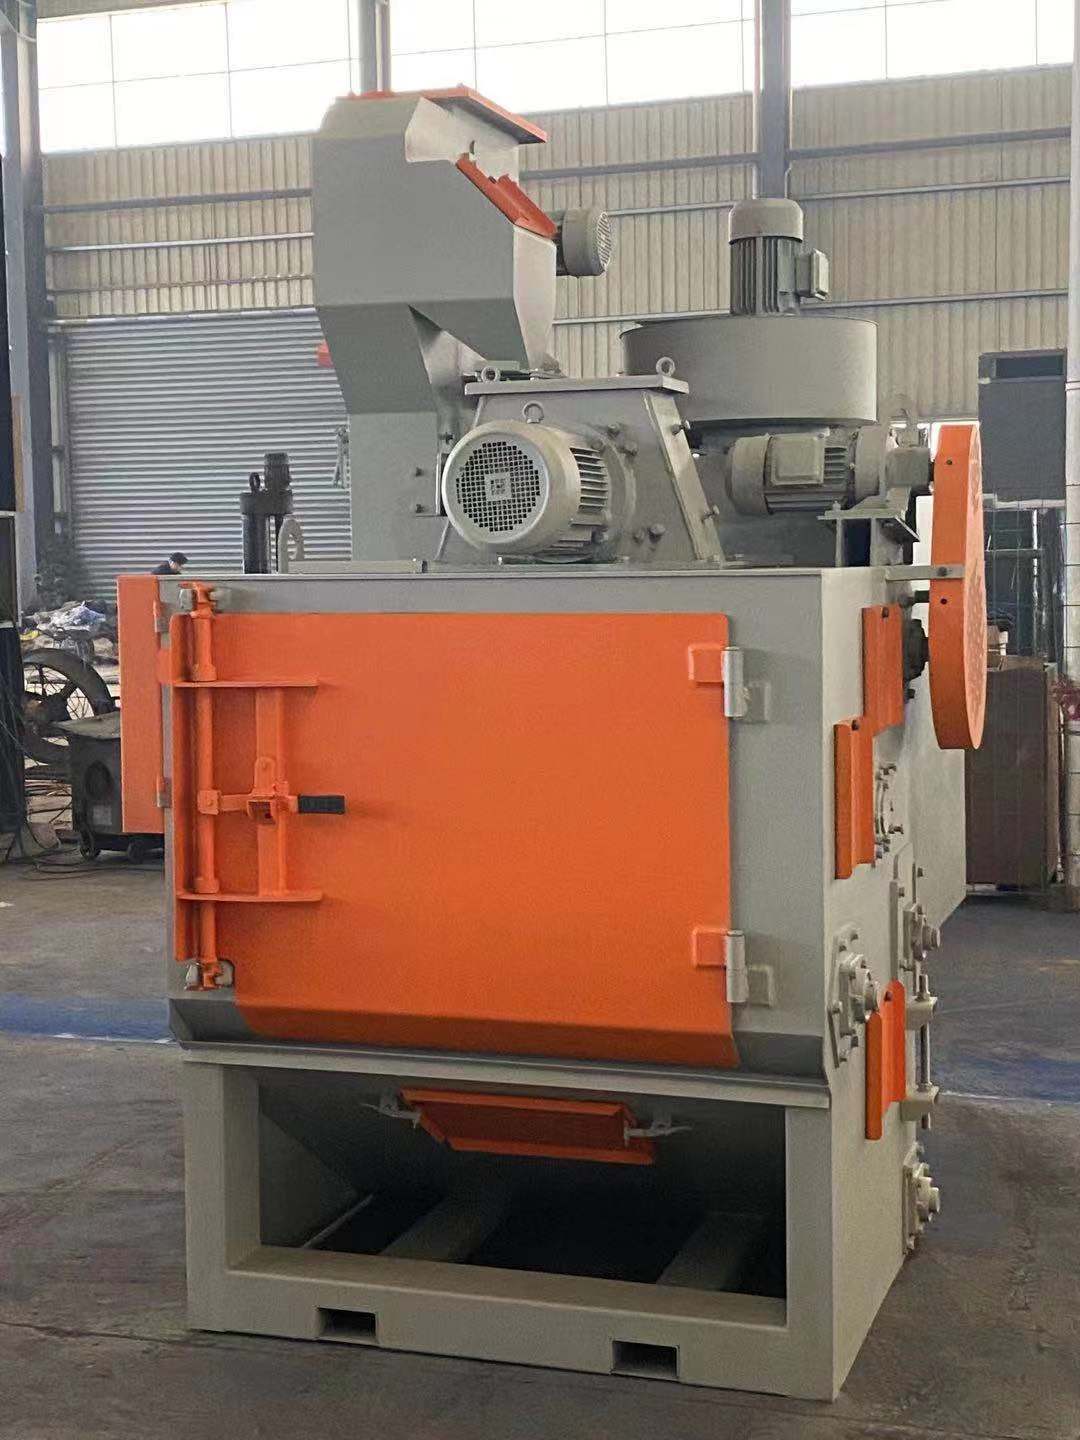 Rubber Belt Shot Blasting Machine for Bolt Cleaning and Strengthening(图1)